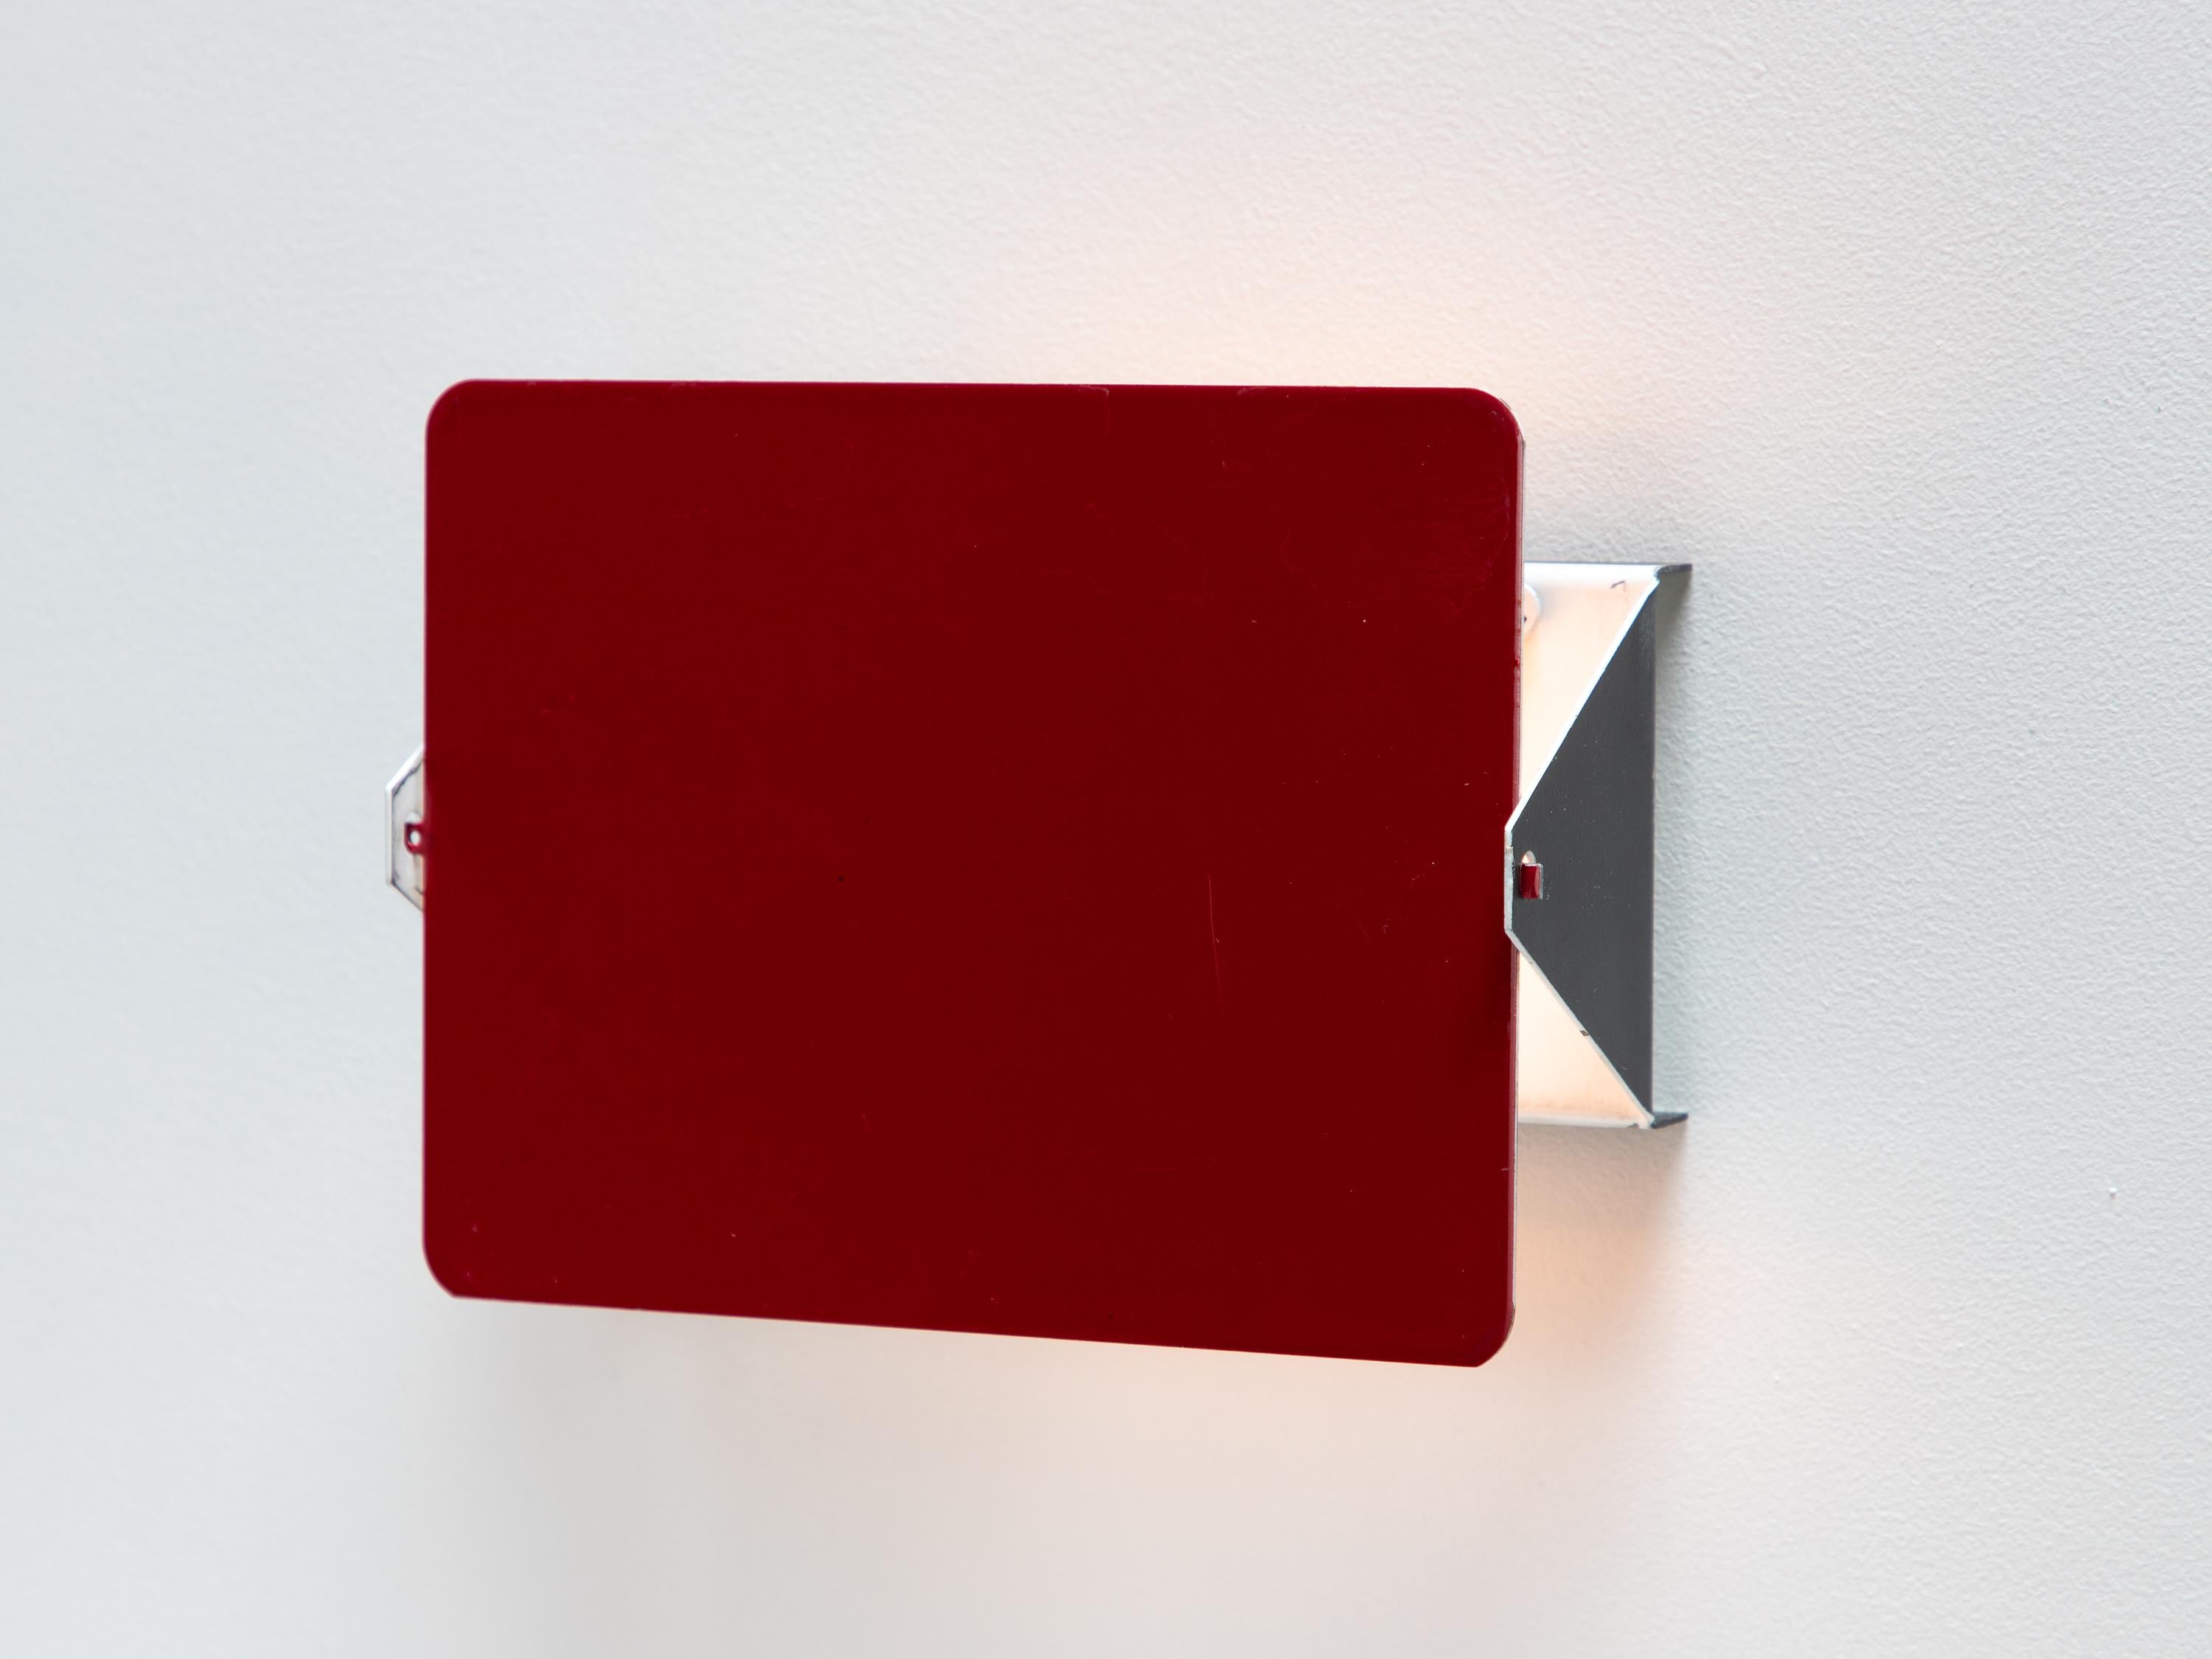 Mid-Century Modern Vintage Charlotte Perriand Les Arcs CP1 Wall Light or Sconces - Crimson Red For Sale